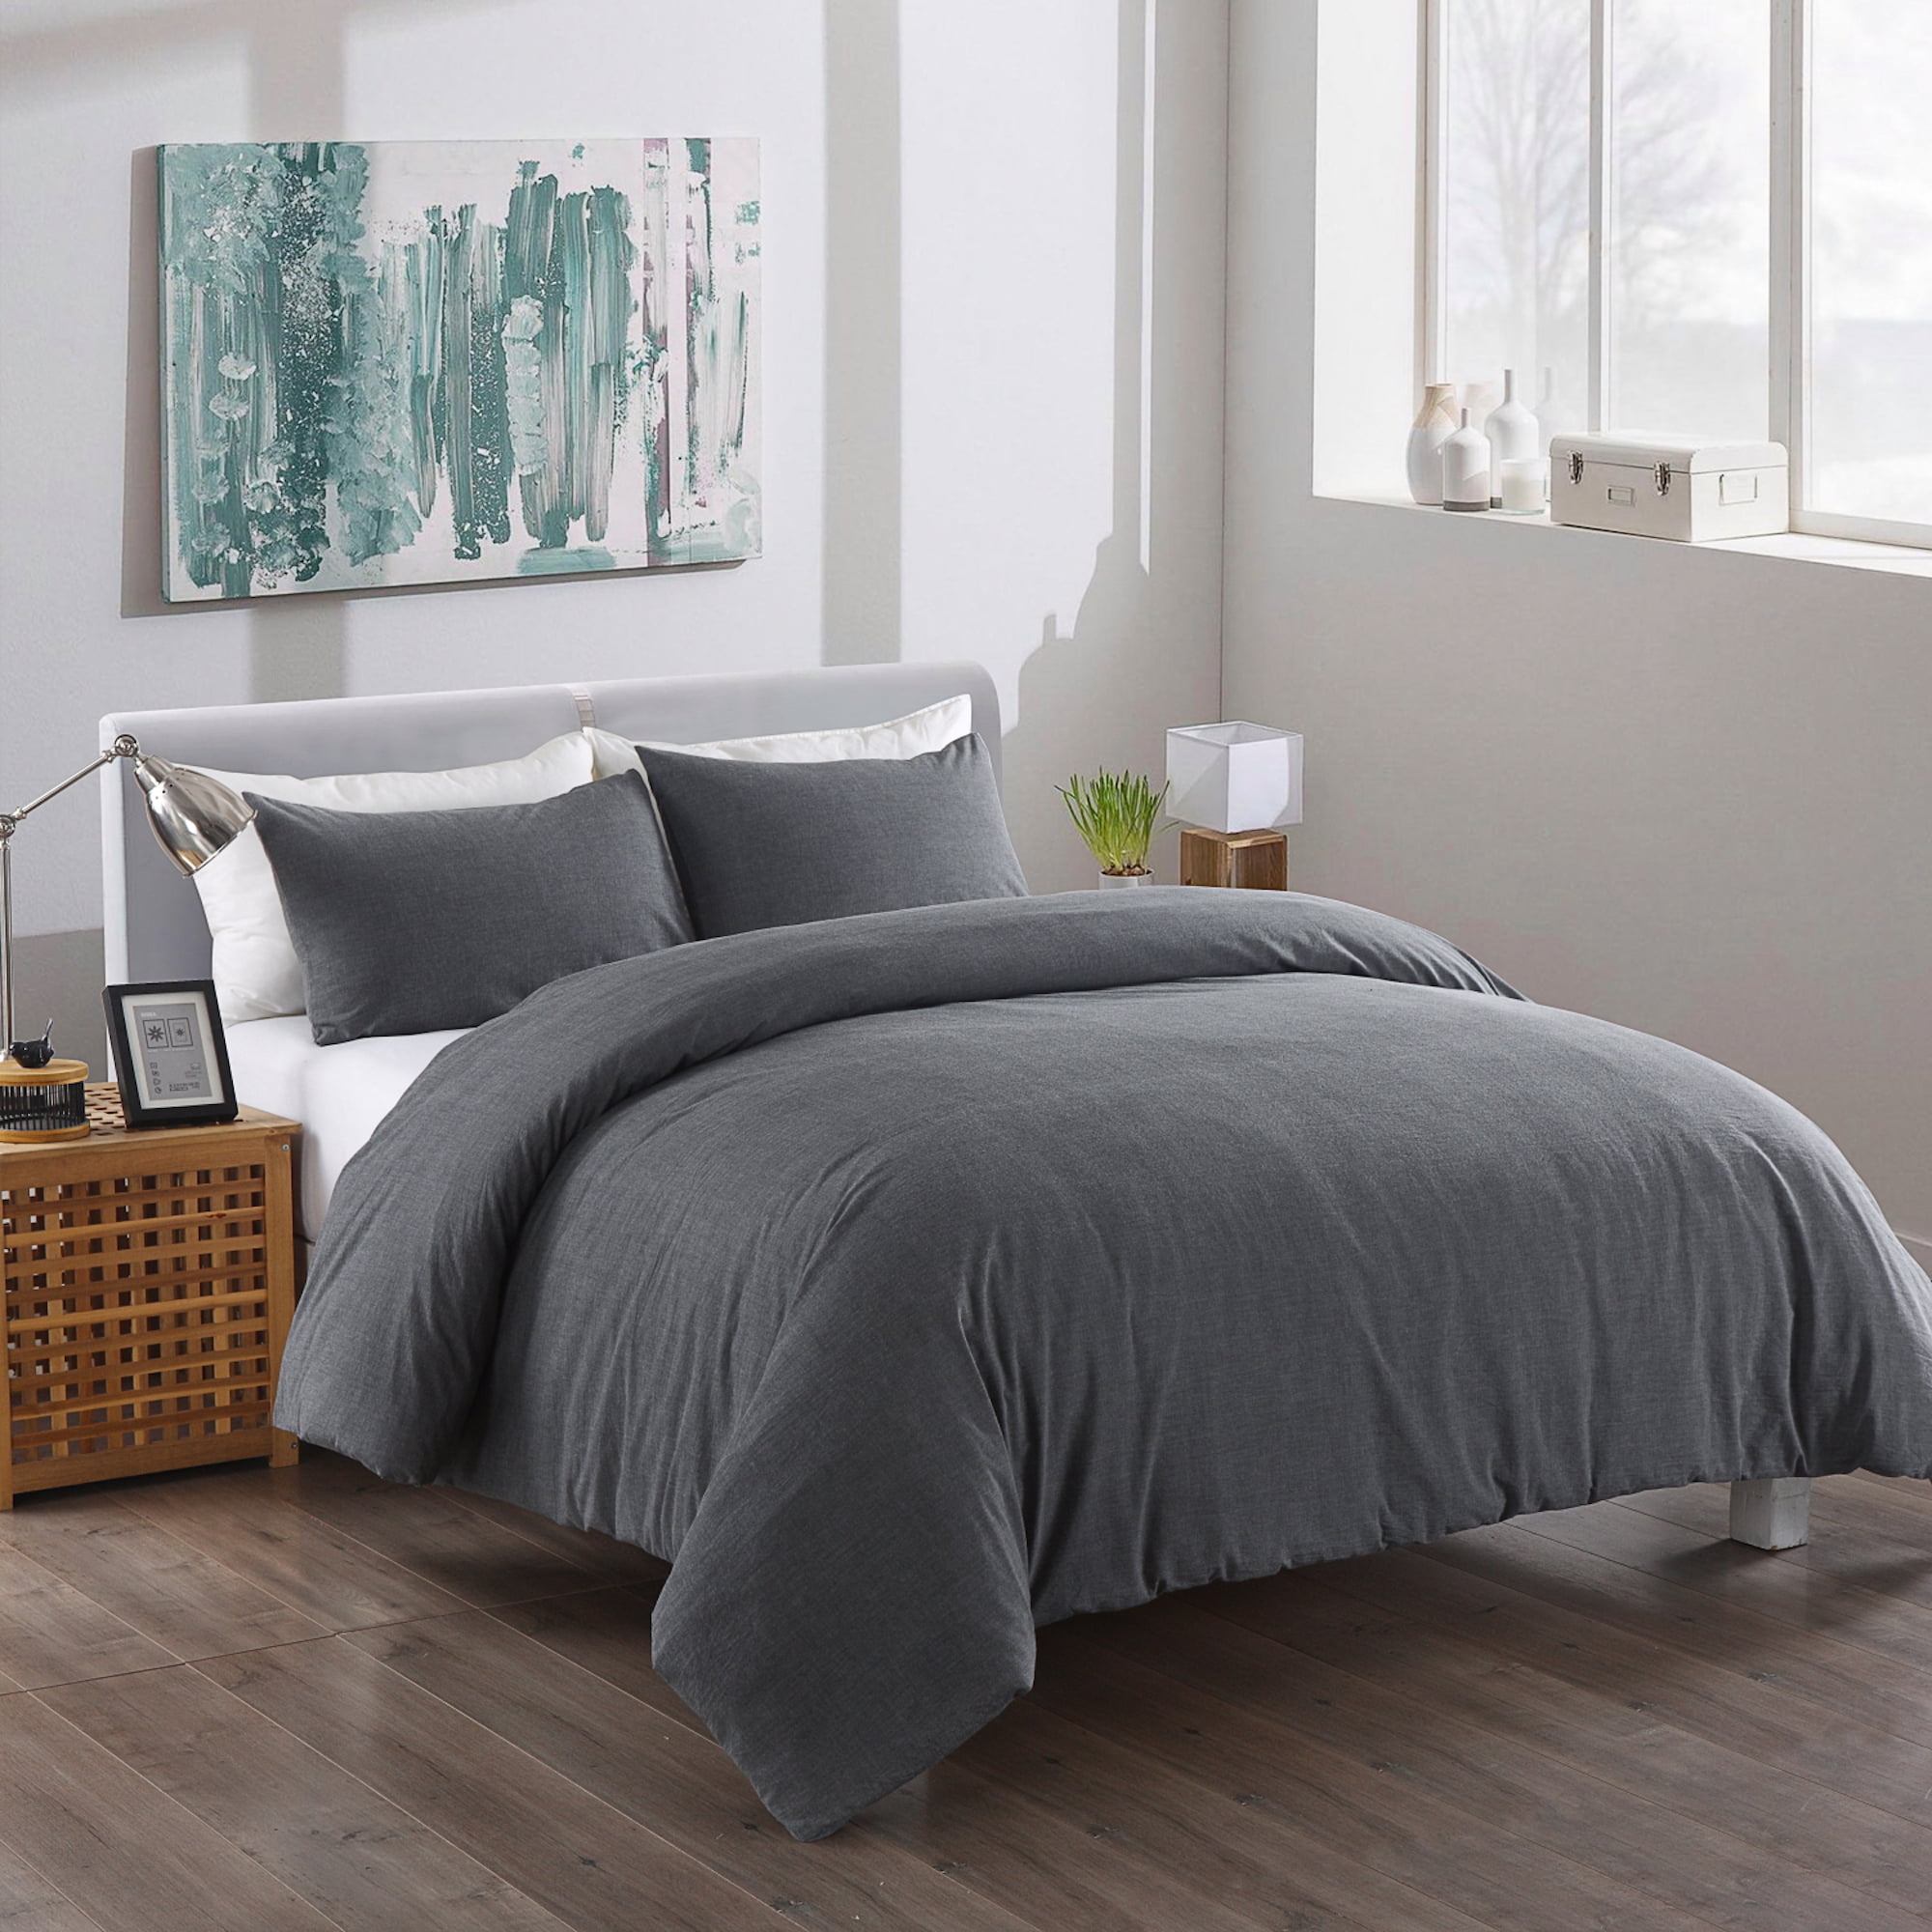 Messy Bed Washed Cotton Duvet Cover And Sham Set Grey Twin